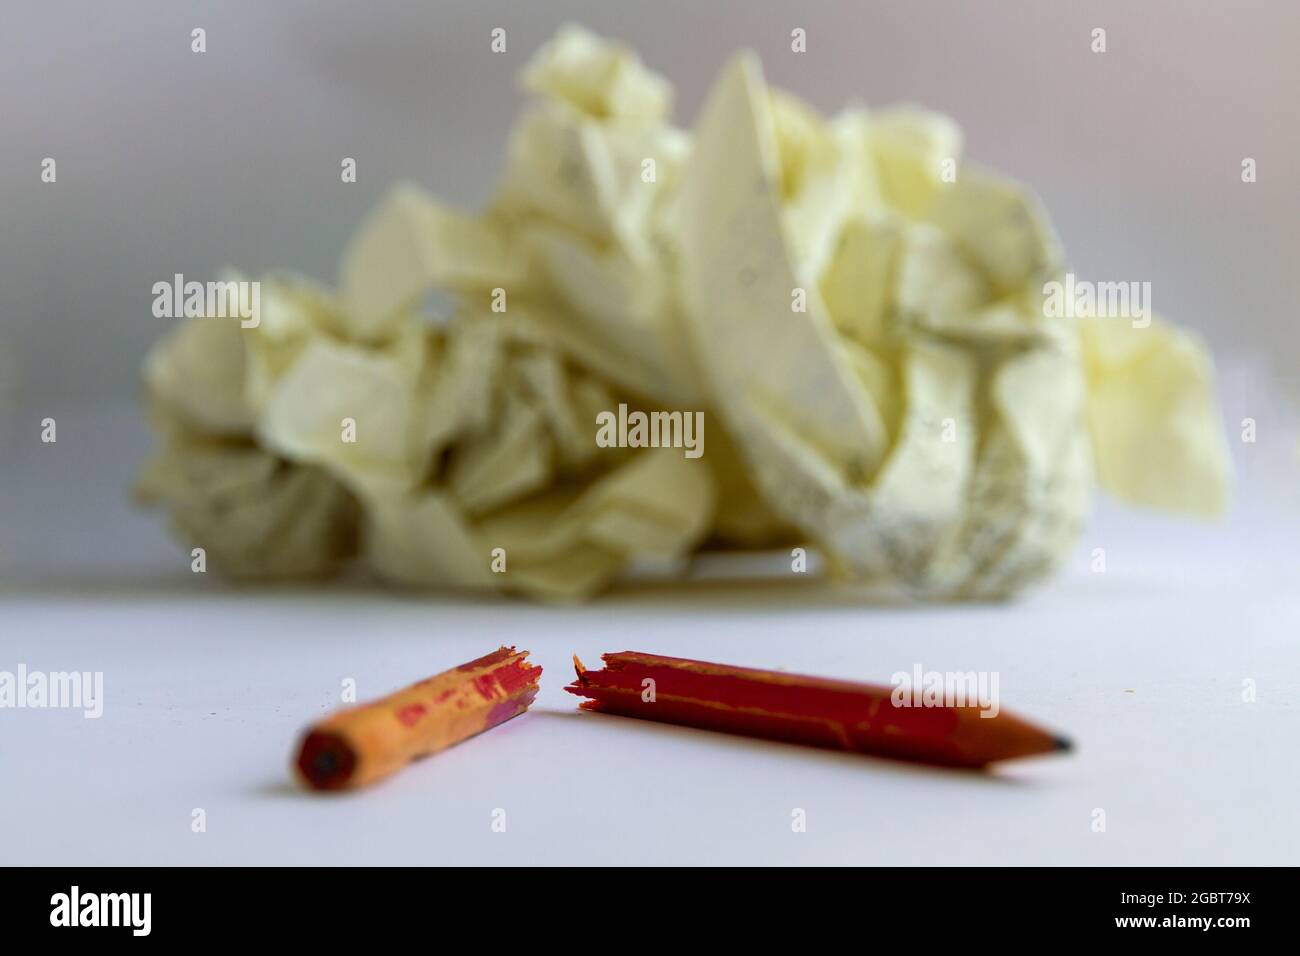 A chewed pencil lies snapped in two in front of out of focus screwed up paper, suggesting writers block. Horizontal format, neutral background. Stock Photo